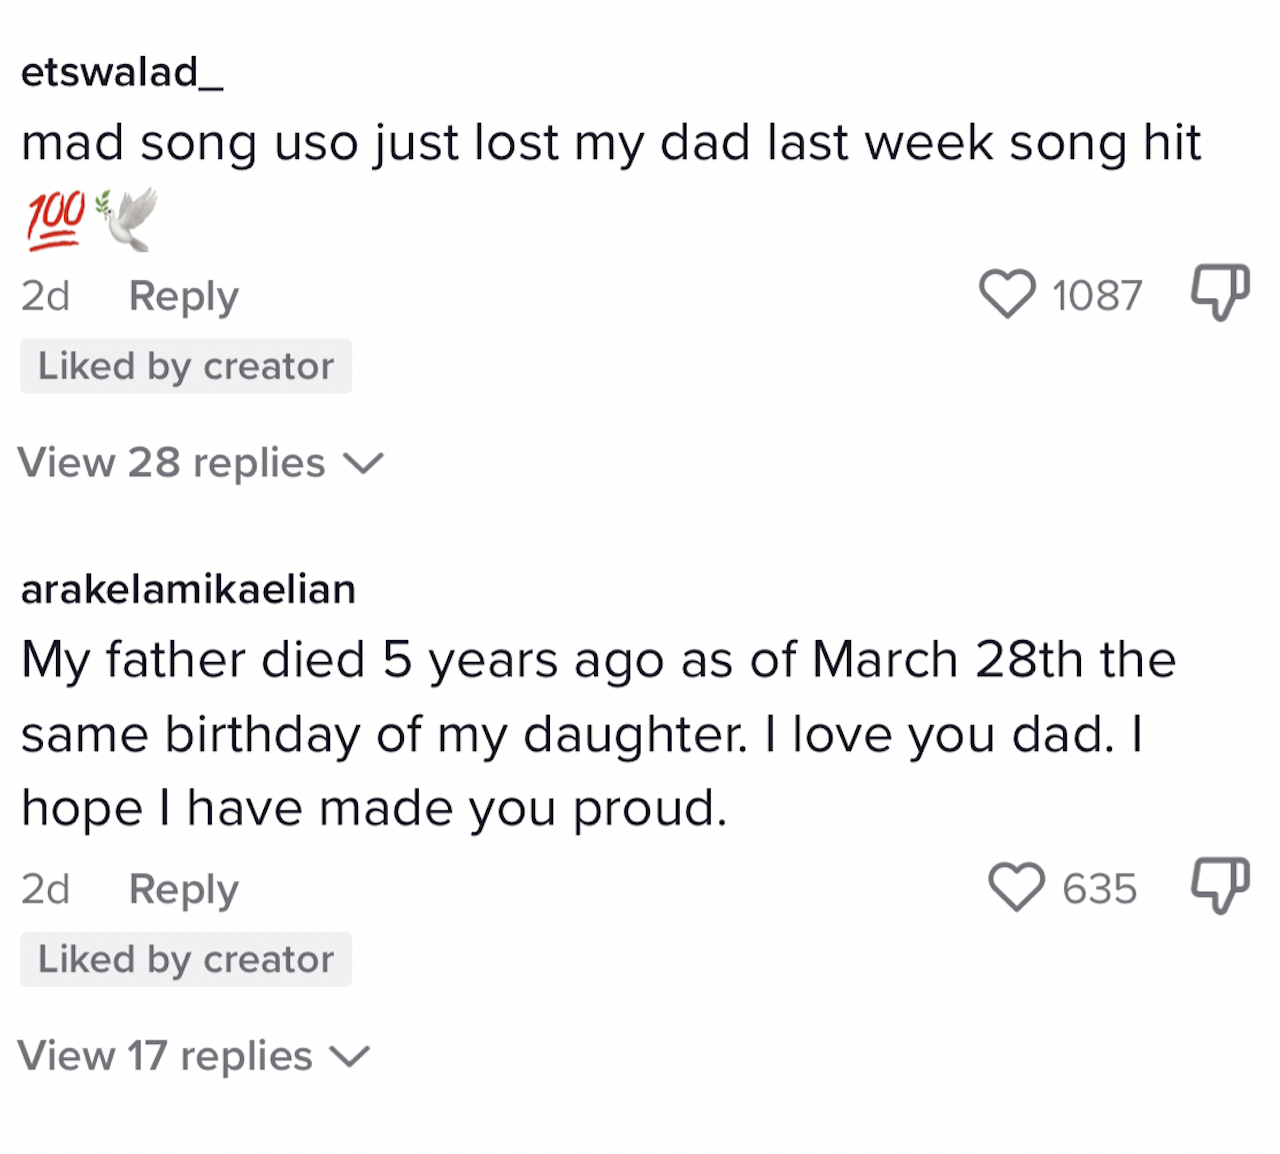 User arakelamikaelian said &quot;My dad died 5 years ago as of March 28th the same birthday of my daughter. I love you dad. I hope I have made you proud&quot;